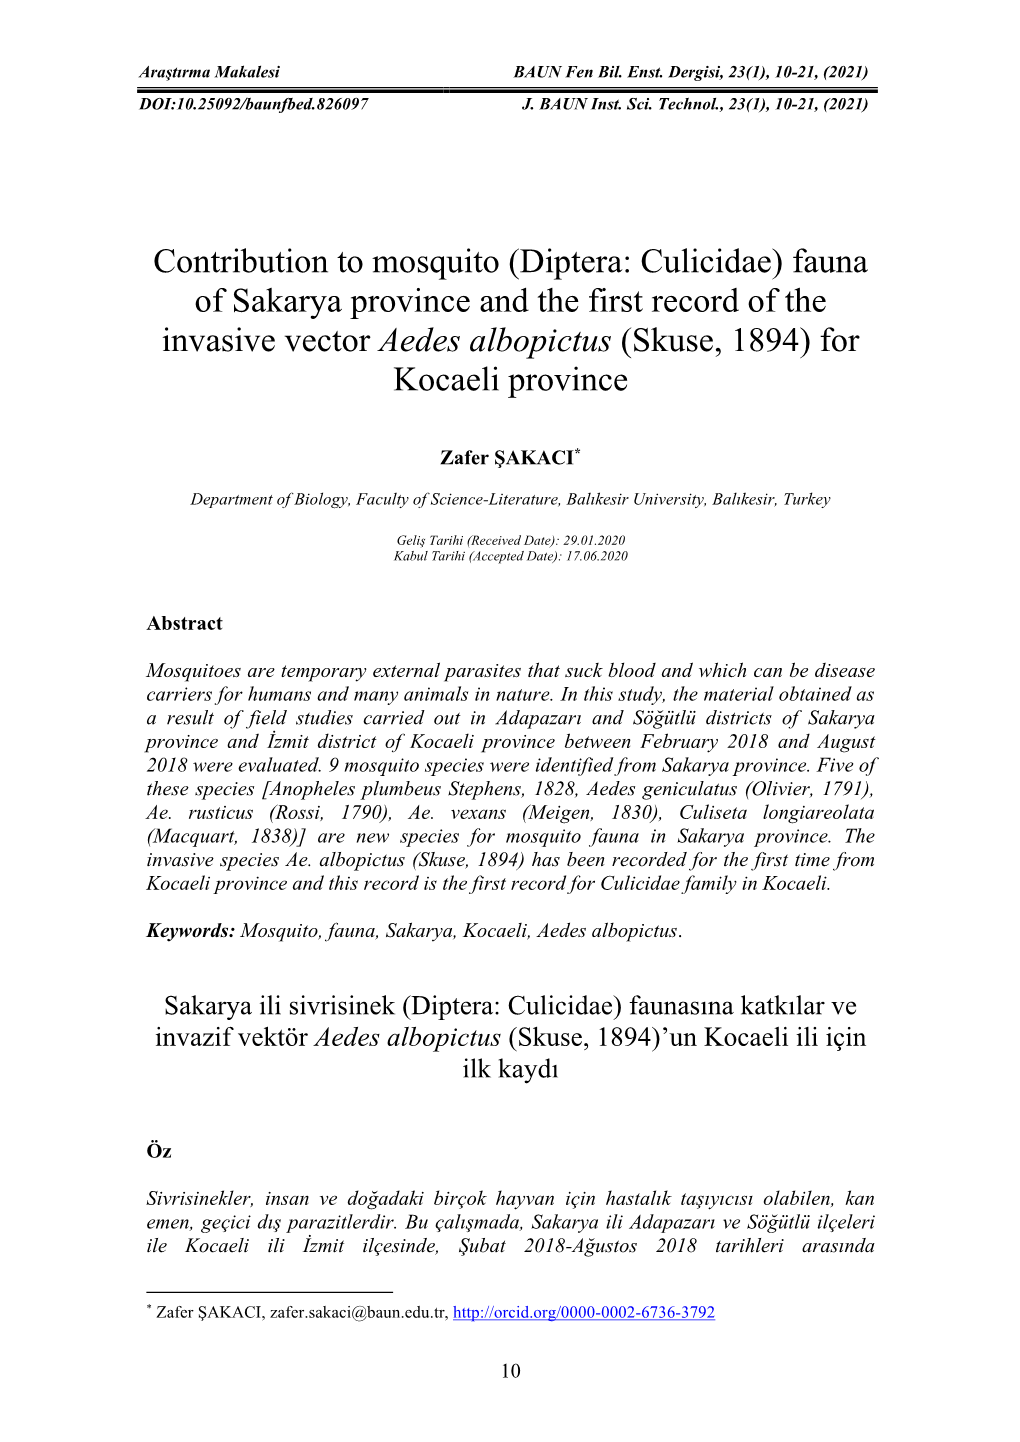 Contribution to Mosquito (Diptera: Culicidae) Fauna of Sakarya Province and the First Record of the Invasive Vector Aedes Albopi